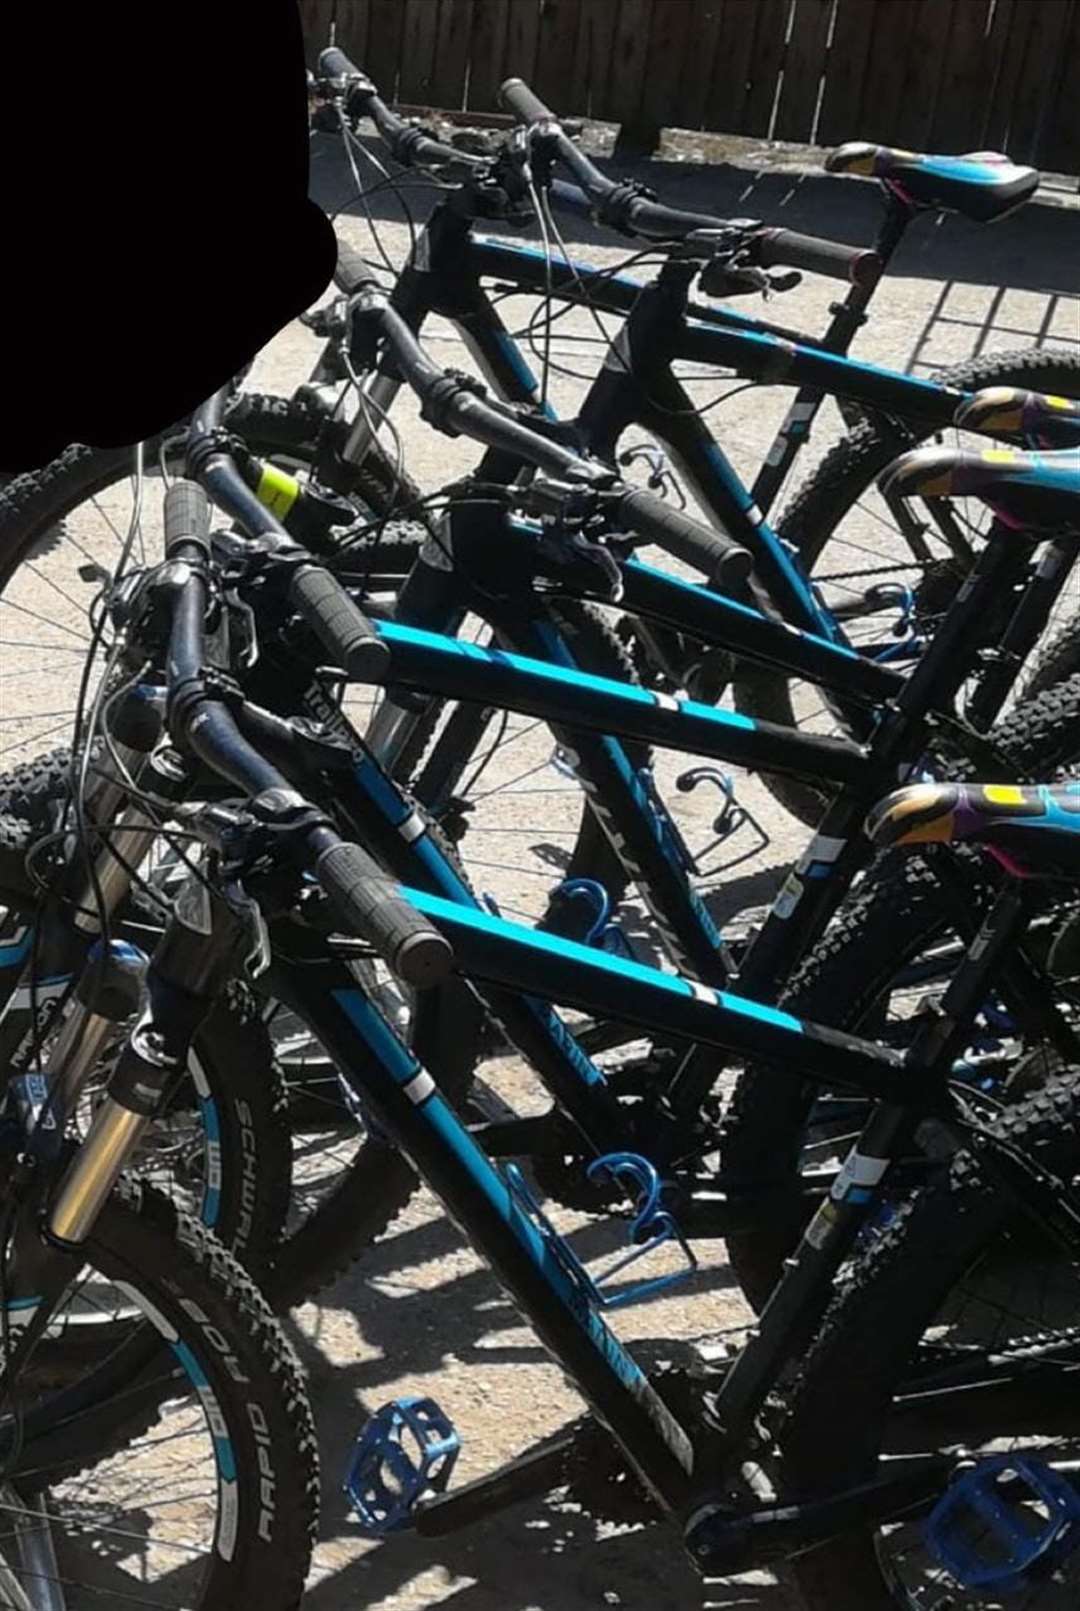 The five stolen bicycles. Picture: MXCP